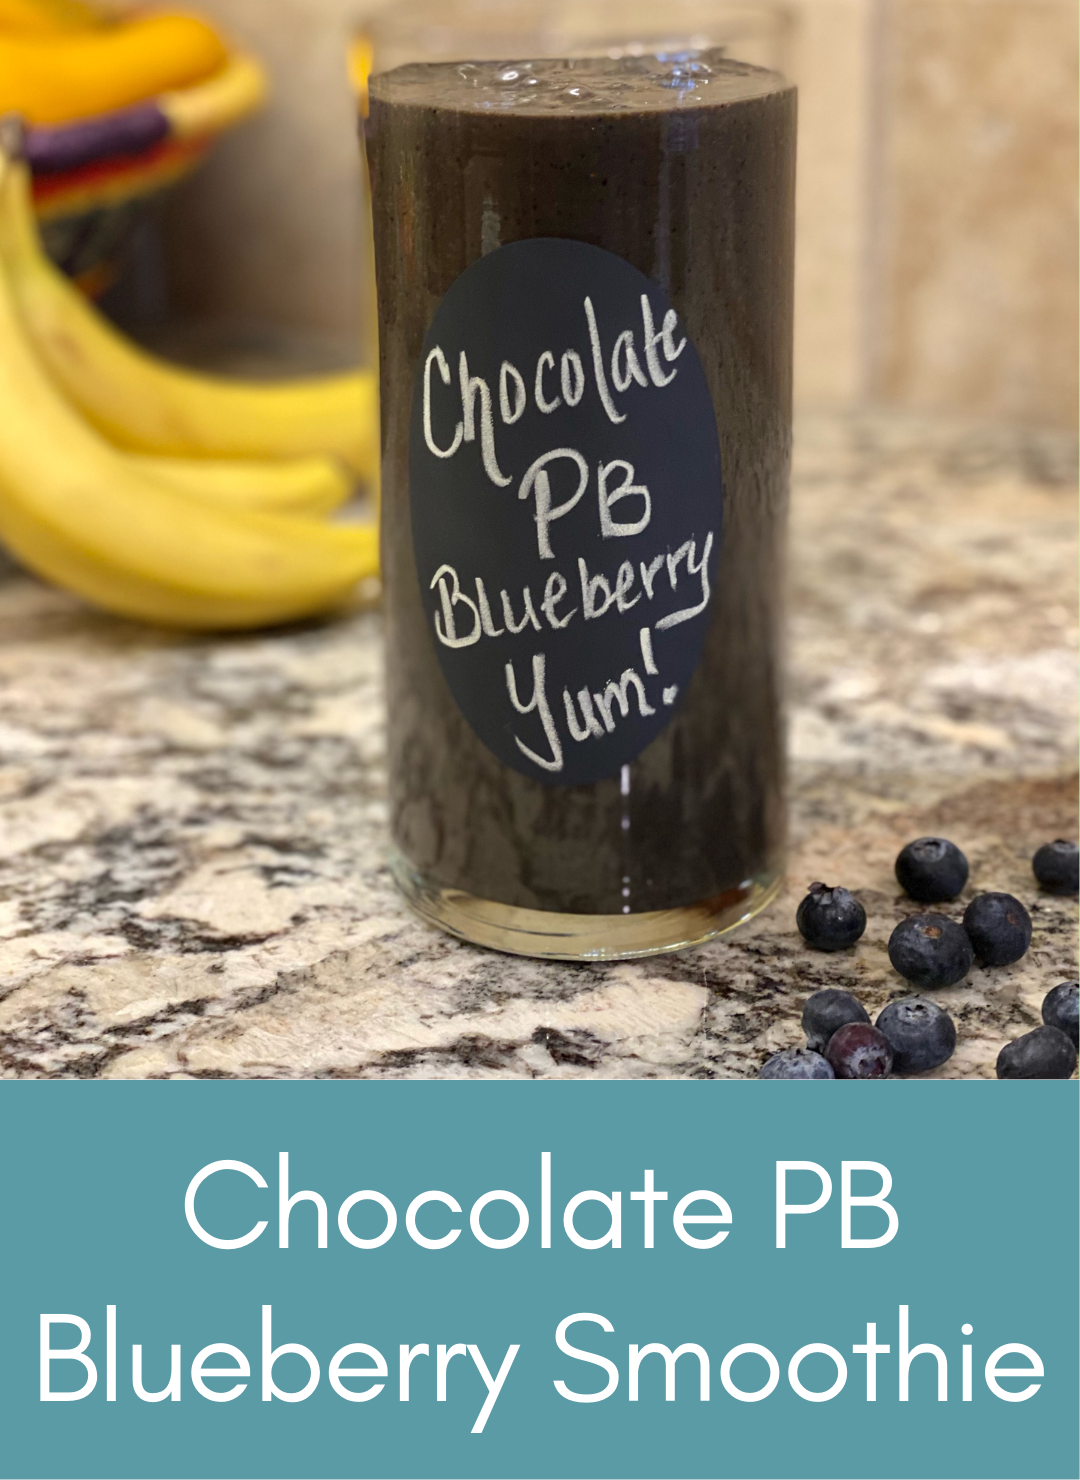 Chocolate peanut butter blueberry plant based smoothie Picture with link to recipe